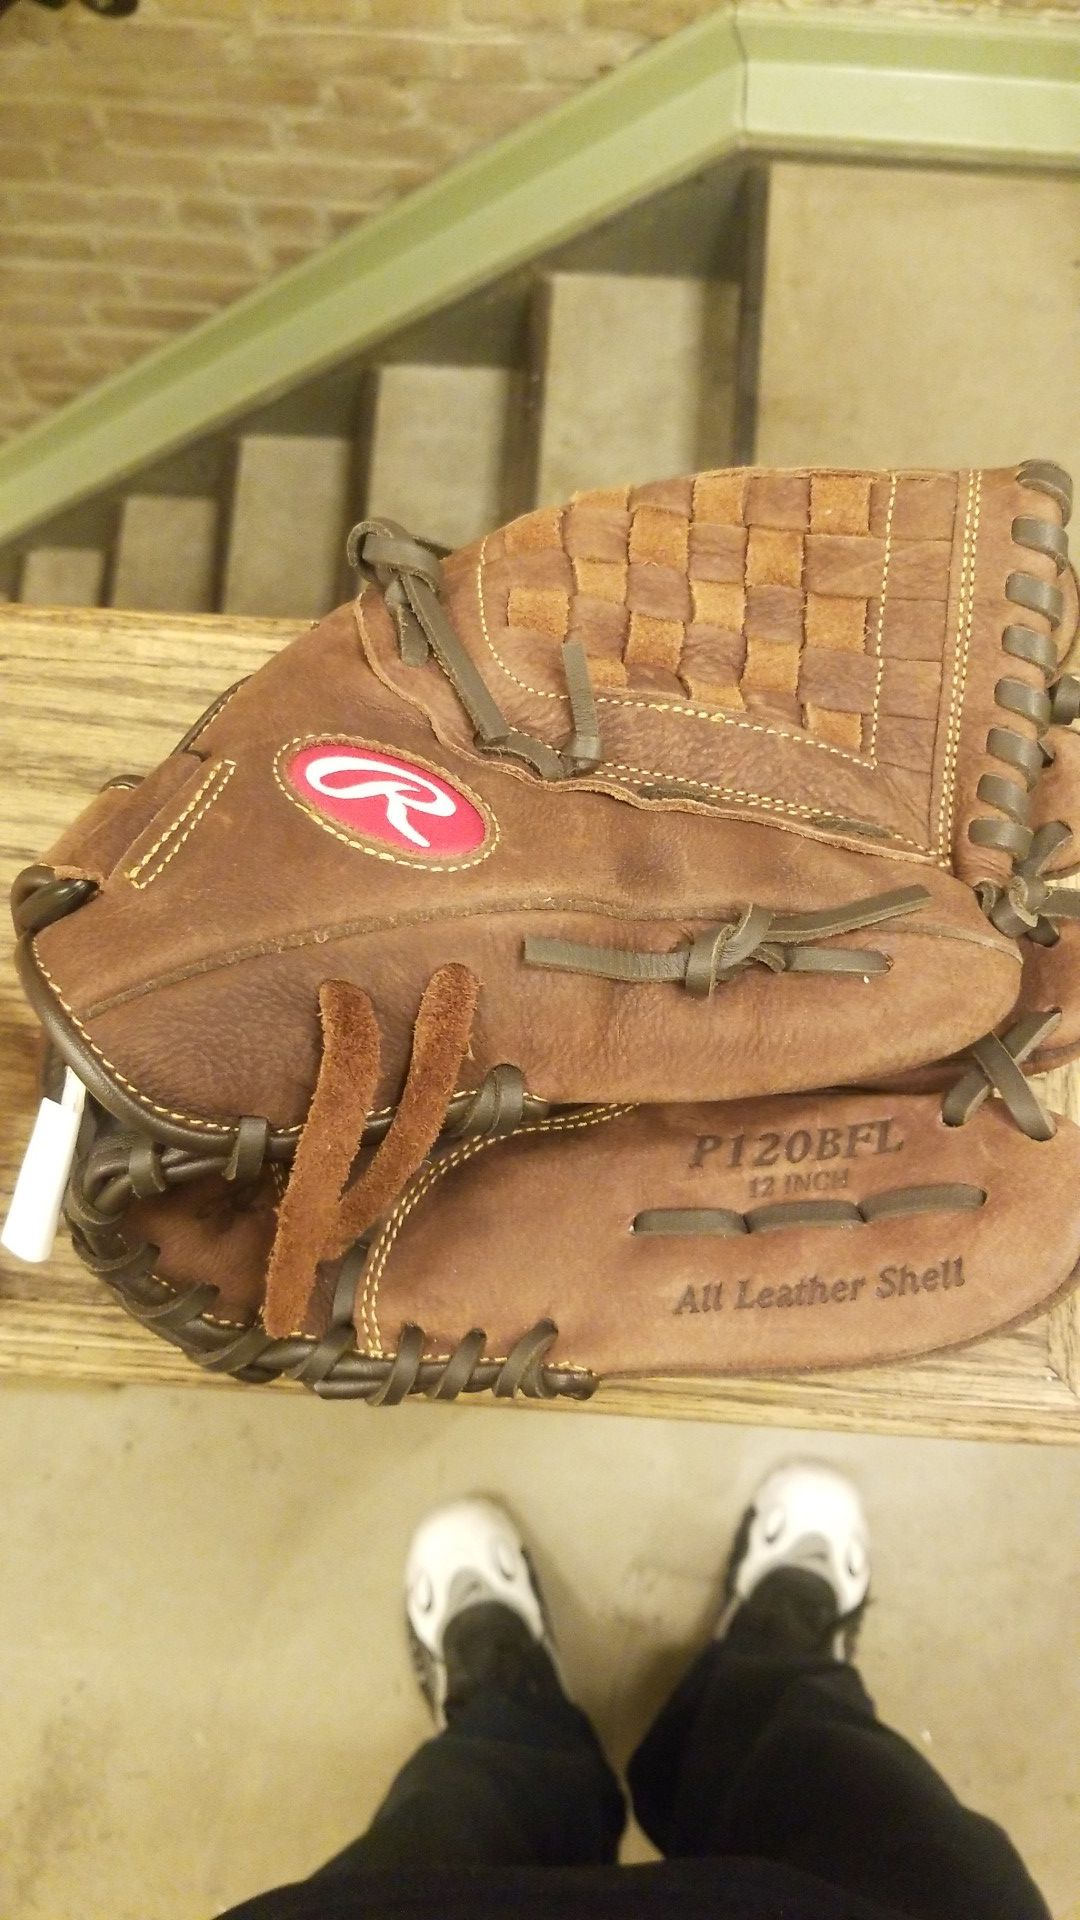 Leather Rawlings 12 Inch Left handed Baseball Glove. Get somebody into this glove and onto the field lol. All leather never used